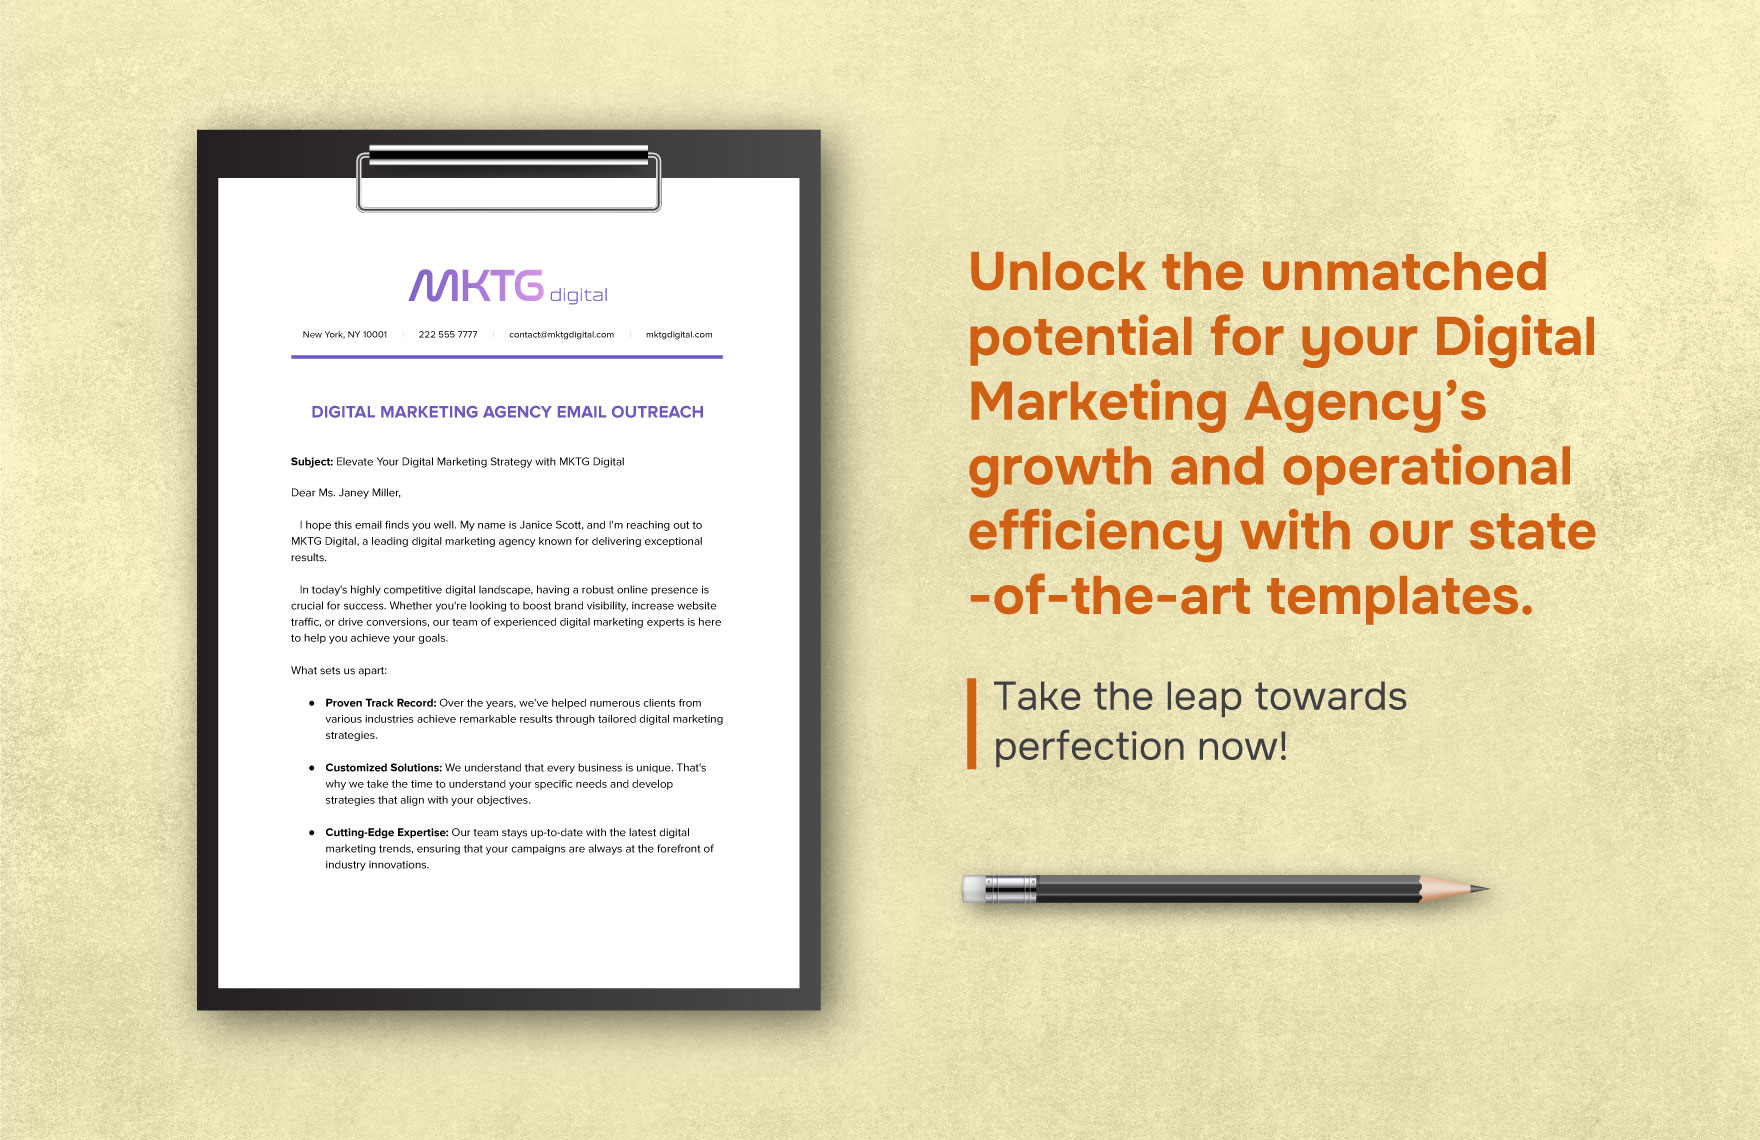 Digital Marketing Agency Email Outreach Template